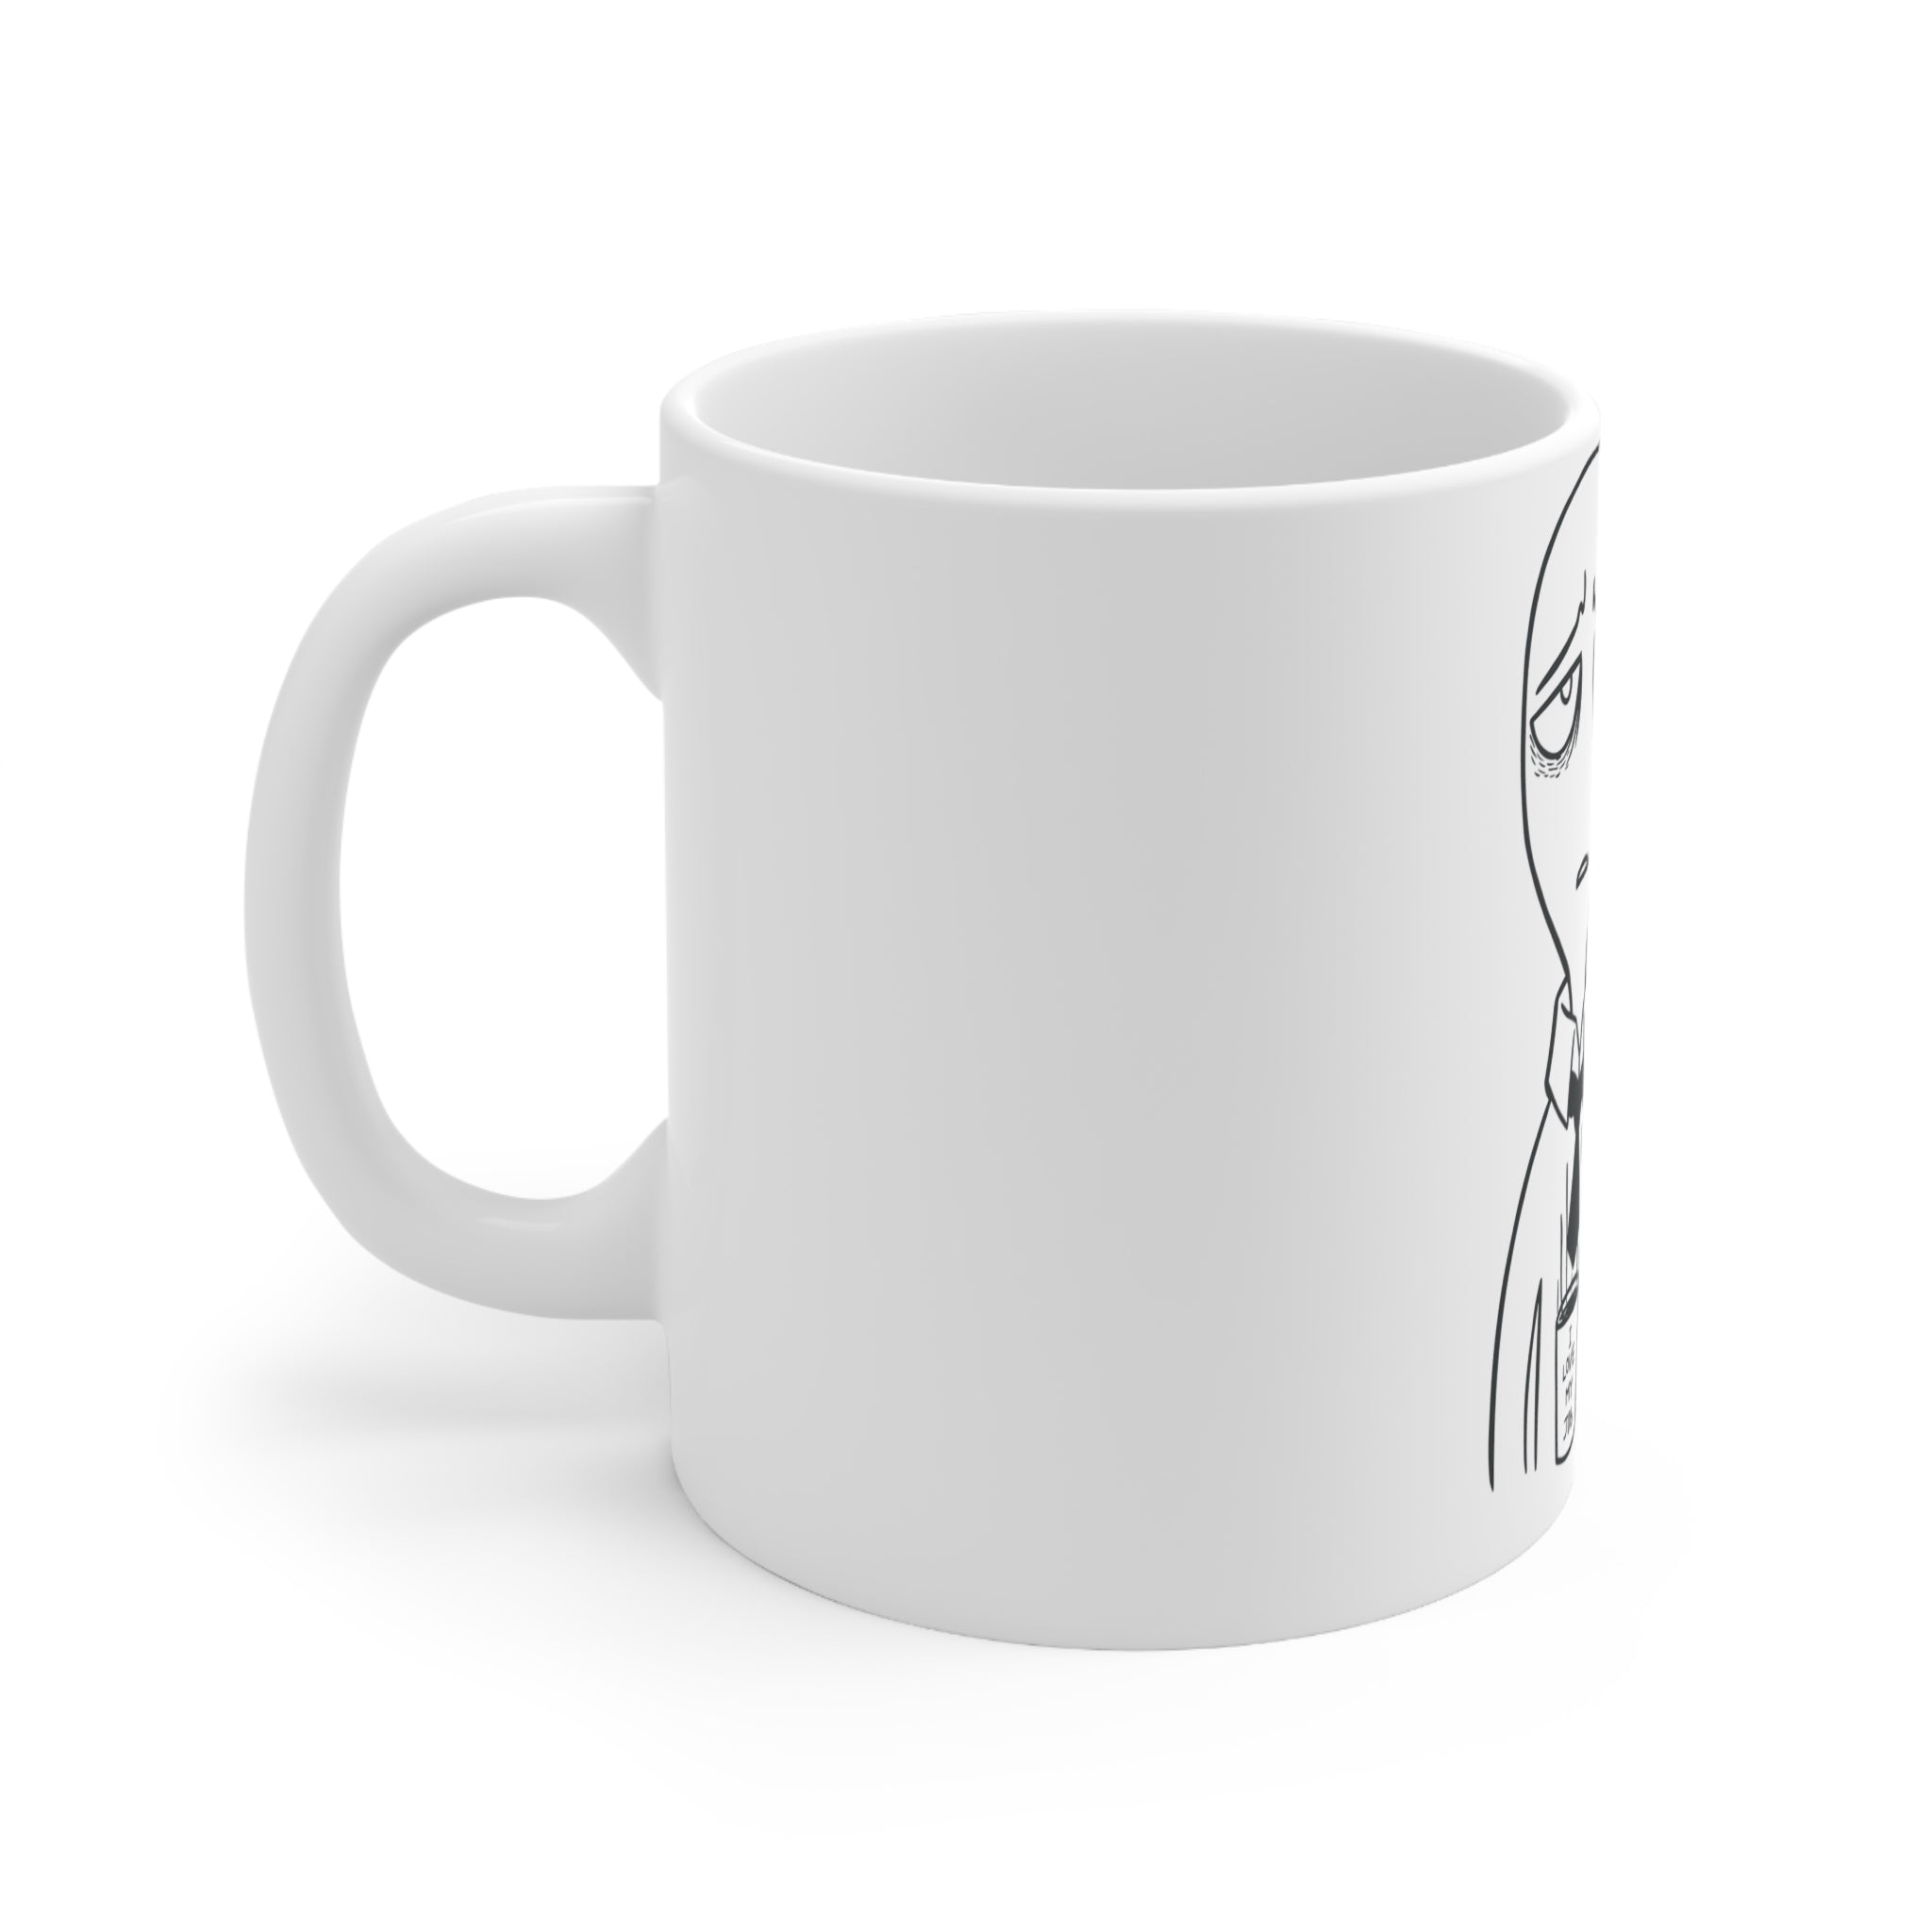 Start Your Day with a Chuckle: 'Good Morning...Love My Job...' Sarcastic Pencil Drawn Ceramic Mug 11oz - A Humorous Twist to Your Morning Routine